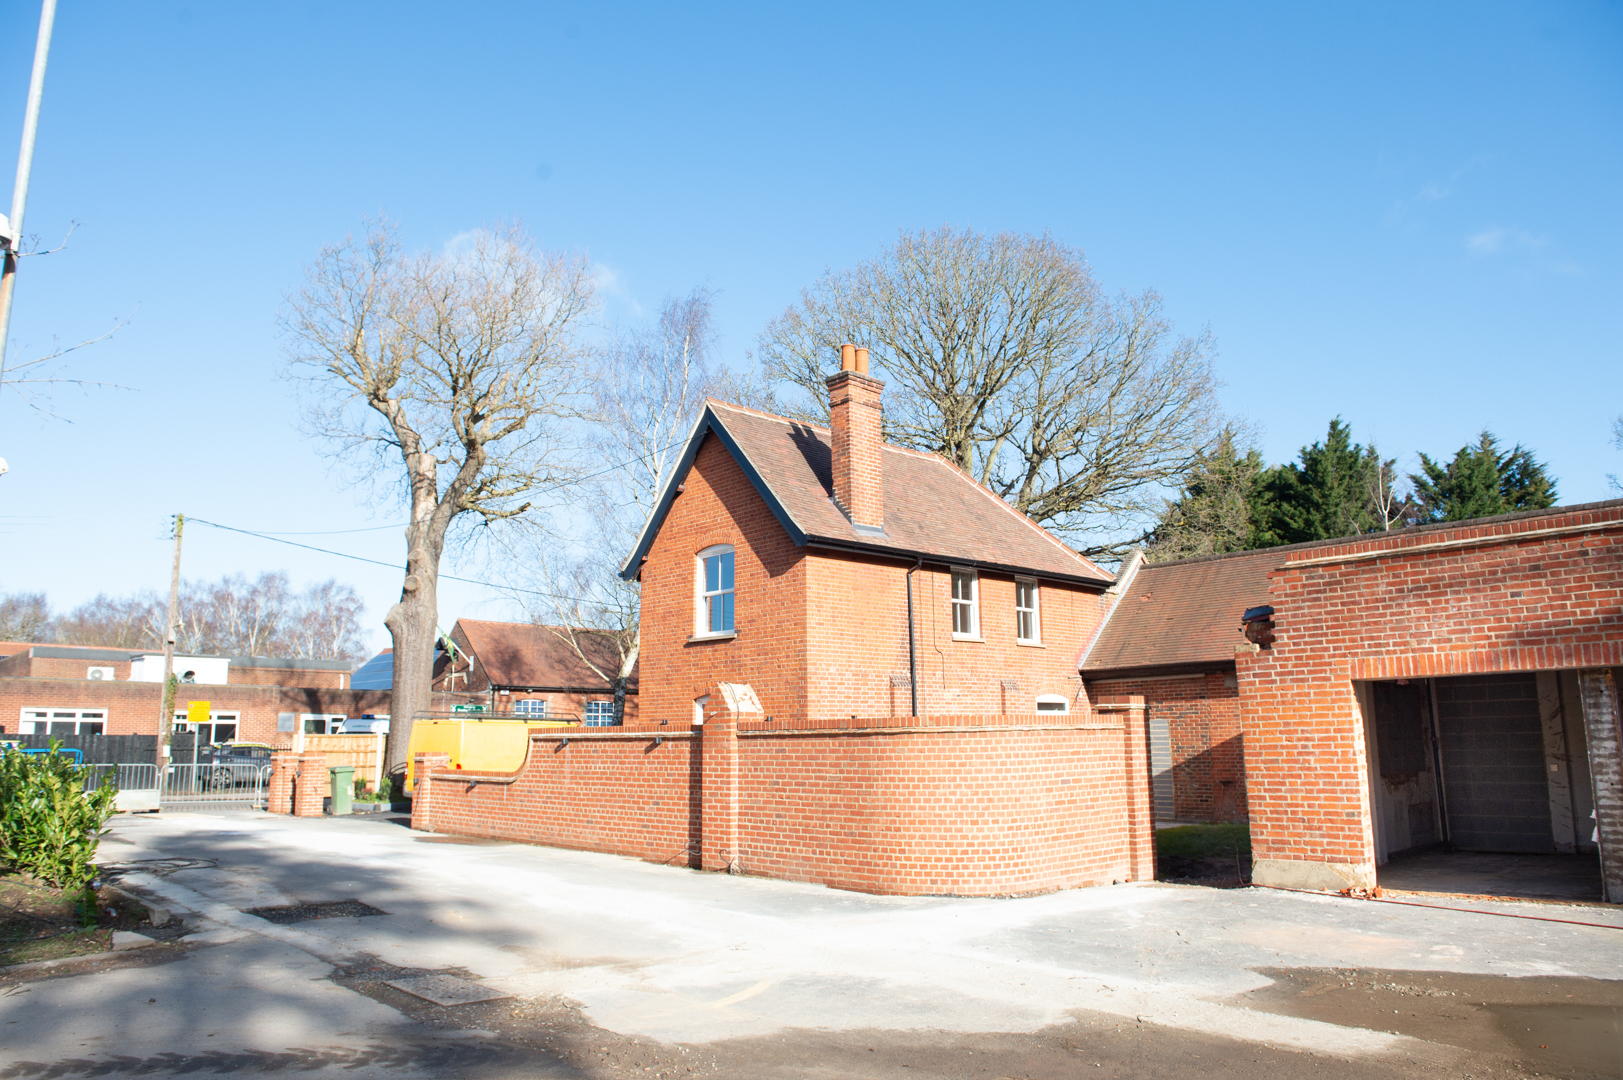 FEBRUARY UPDATE - NEW HOMES AT MILLFIELD PARK ESSEX